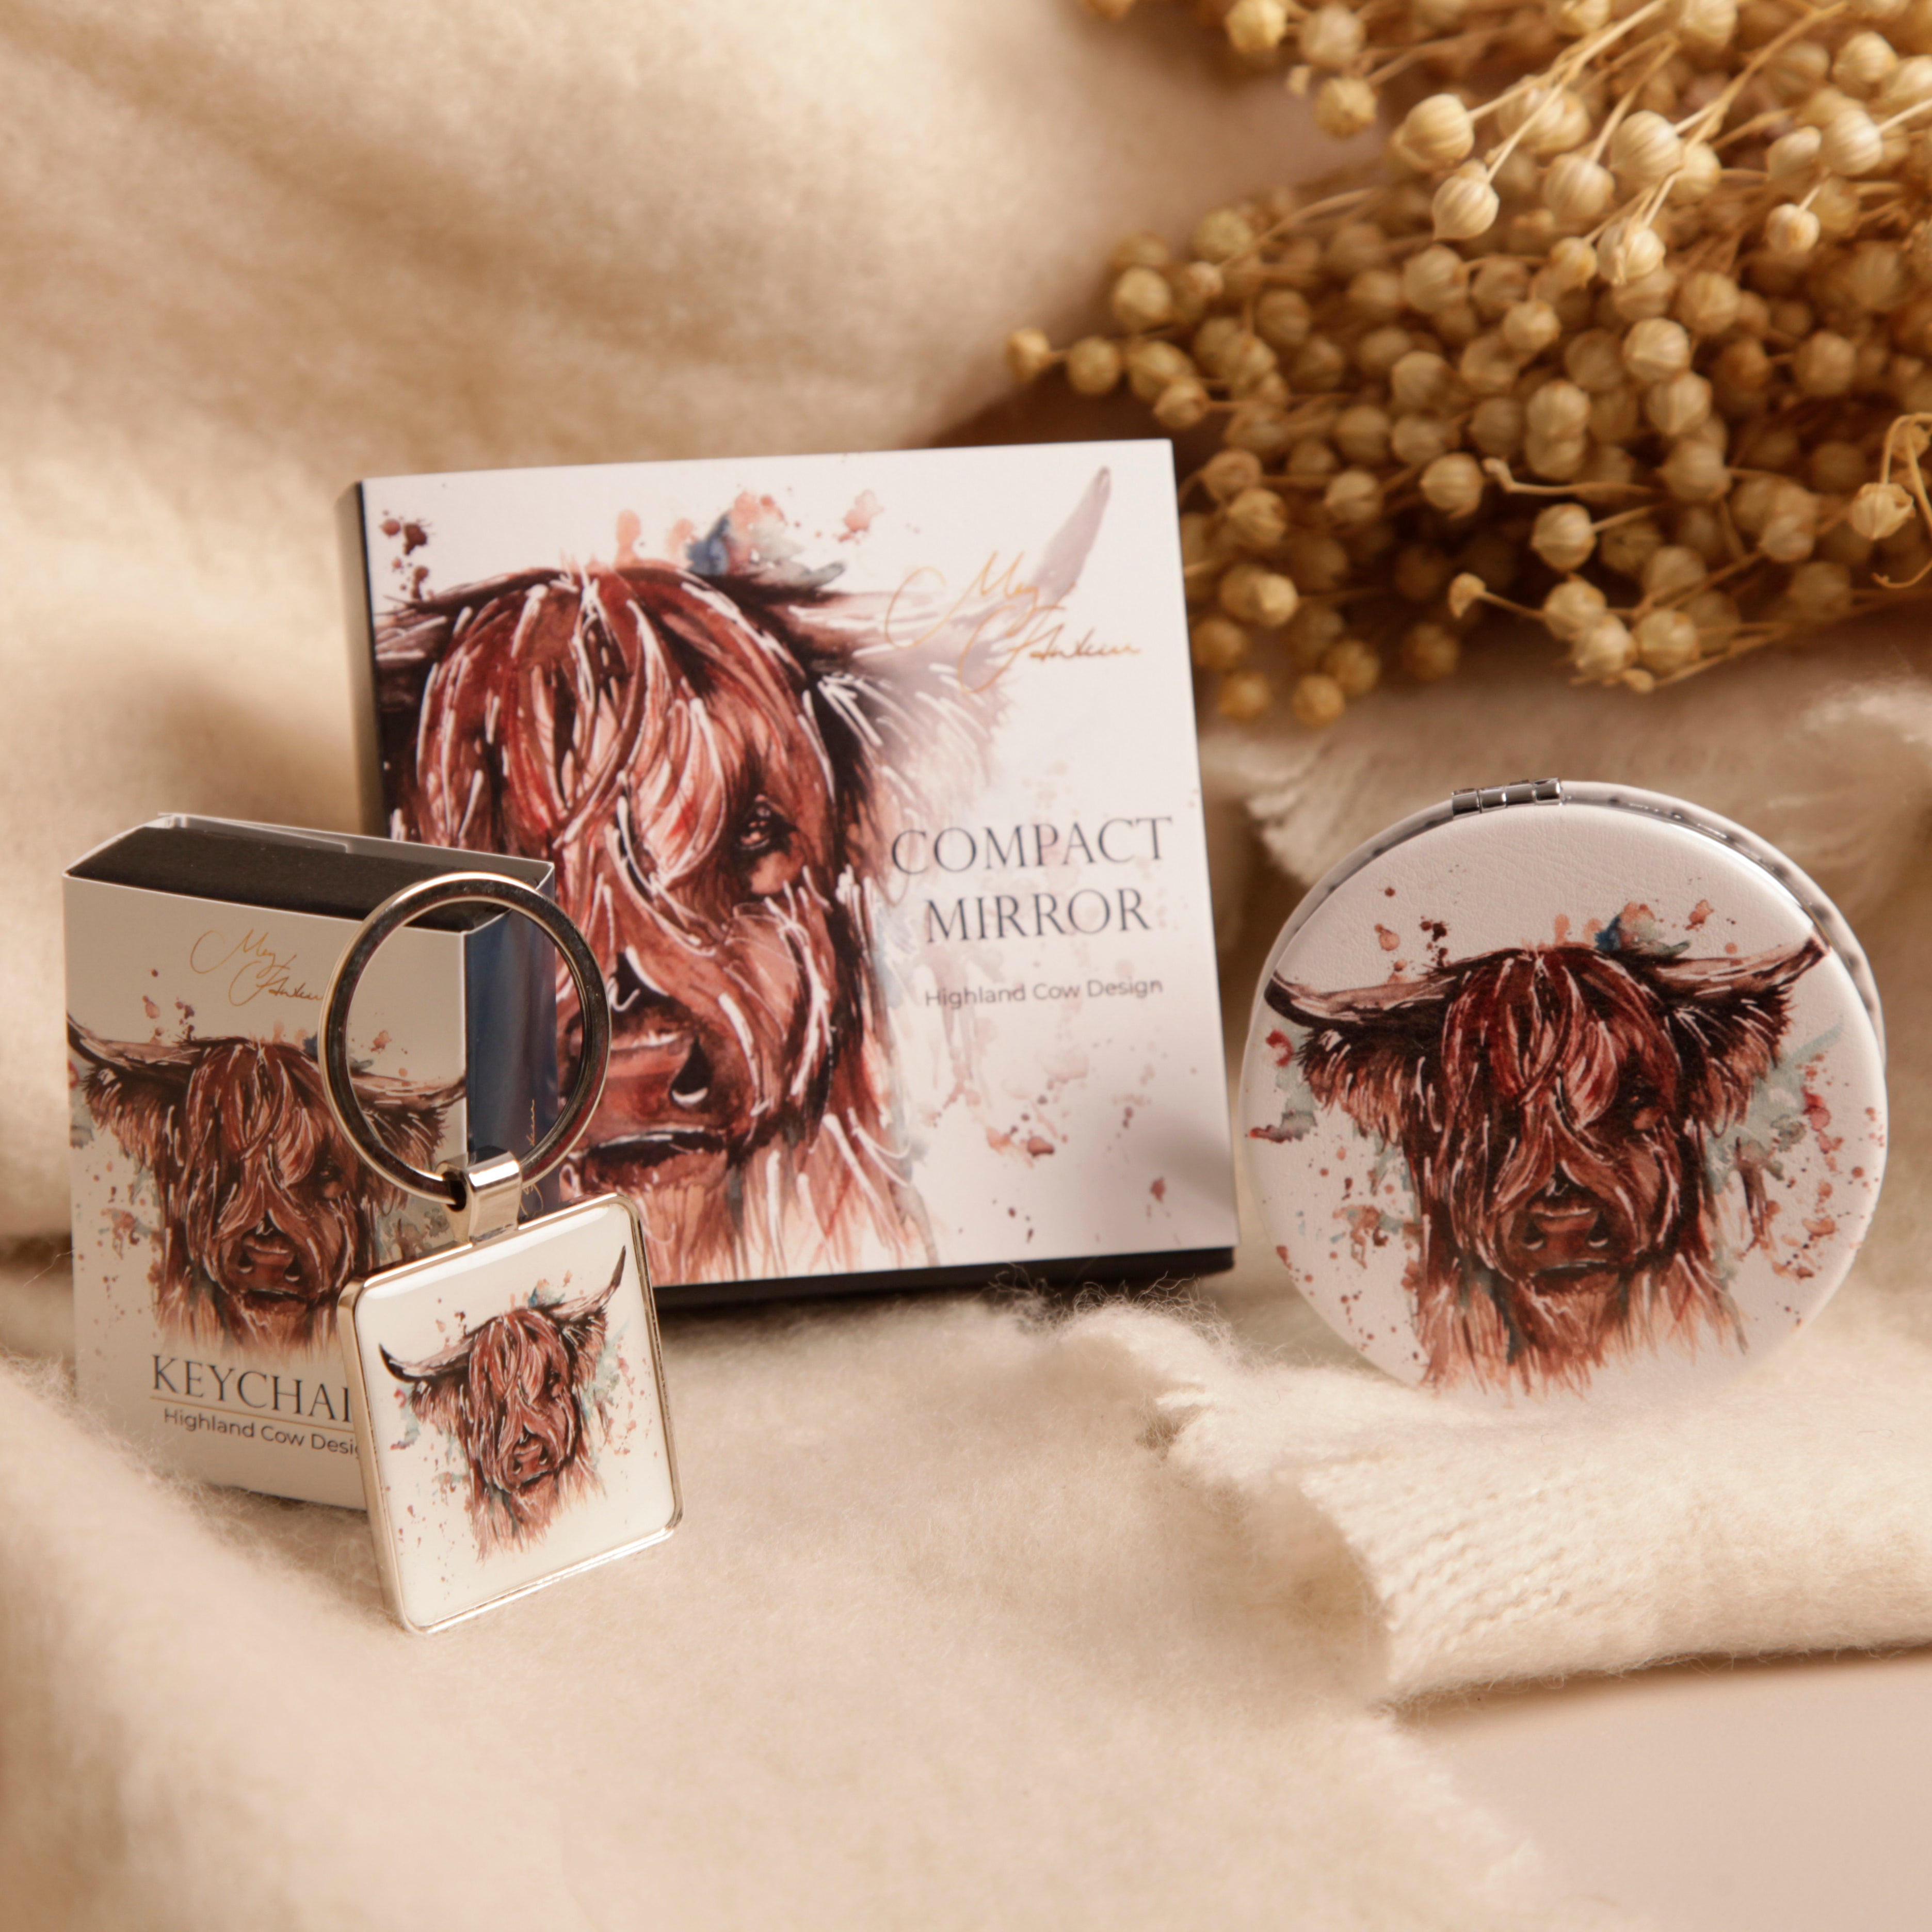 Highland Cow Keychain with Gift Box